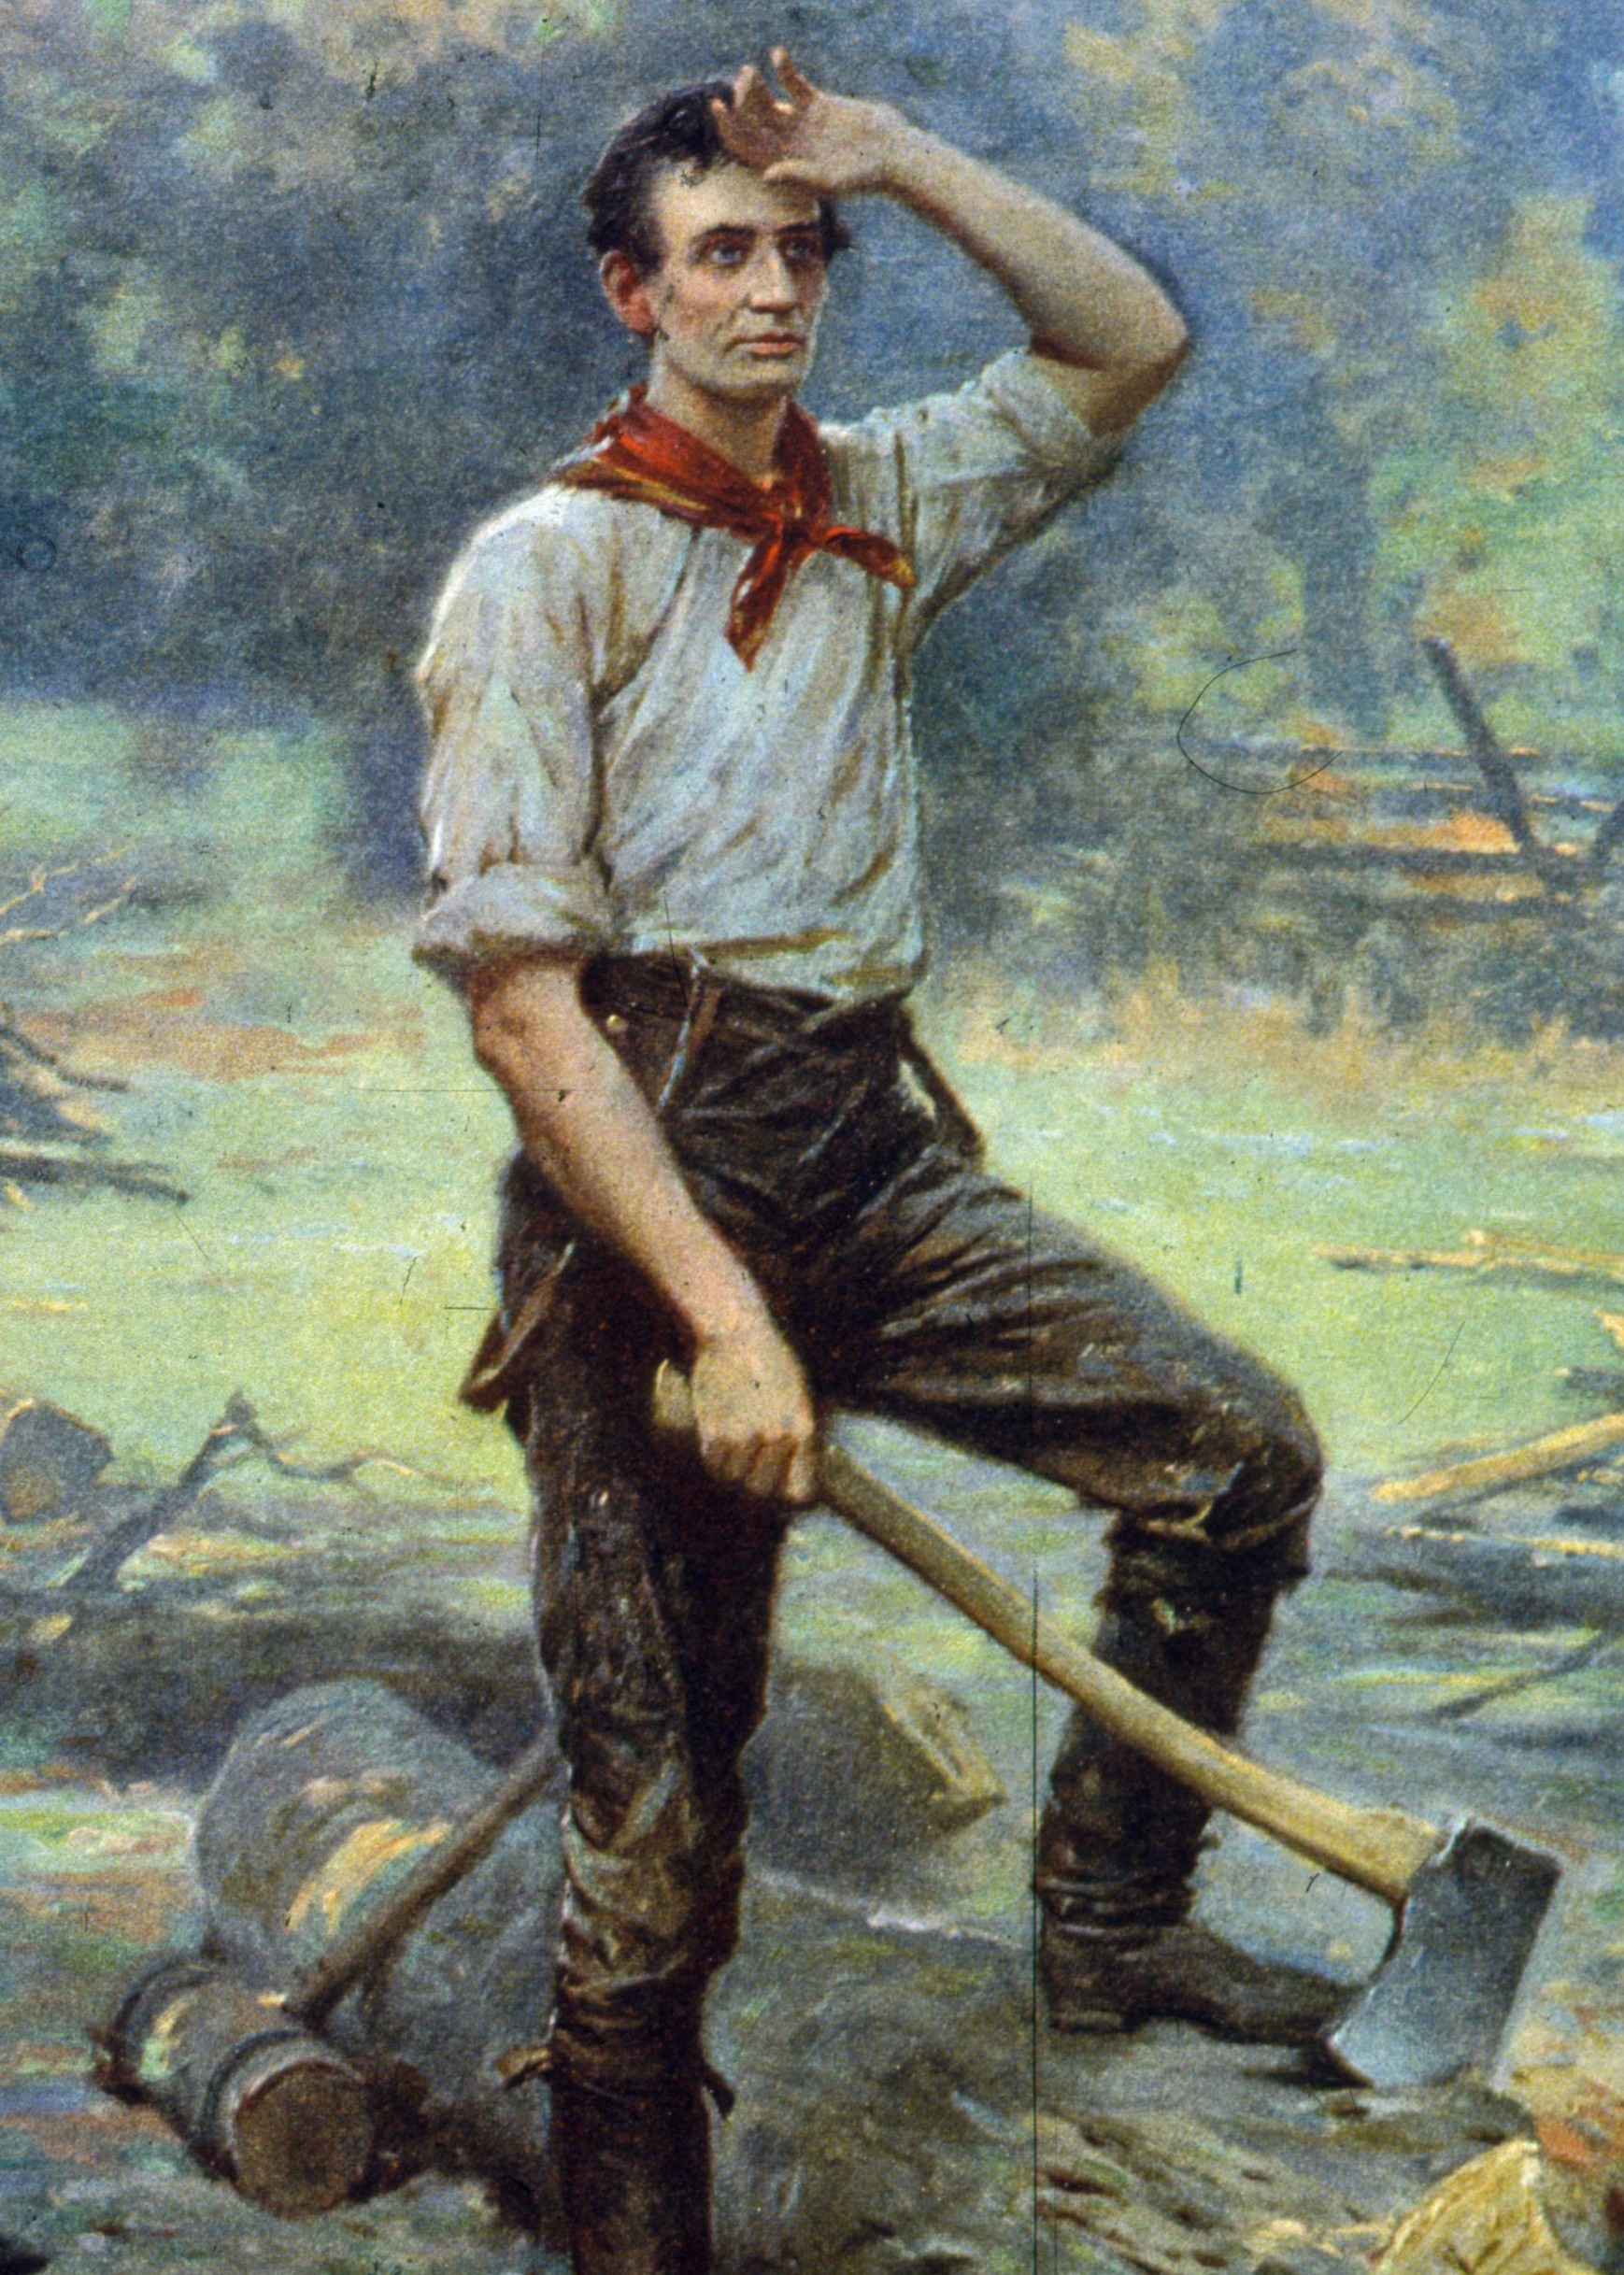 A painting showing Abraham Lincoln at work cutting logs, this early work gained him the nickname of 'railsplitter' when he entered politics. (MPI/Getty Images)